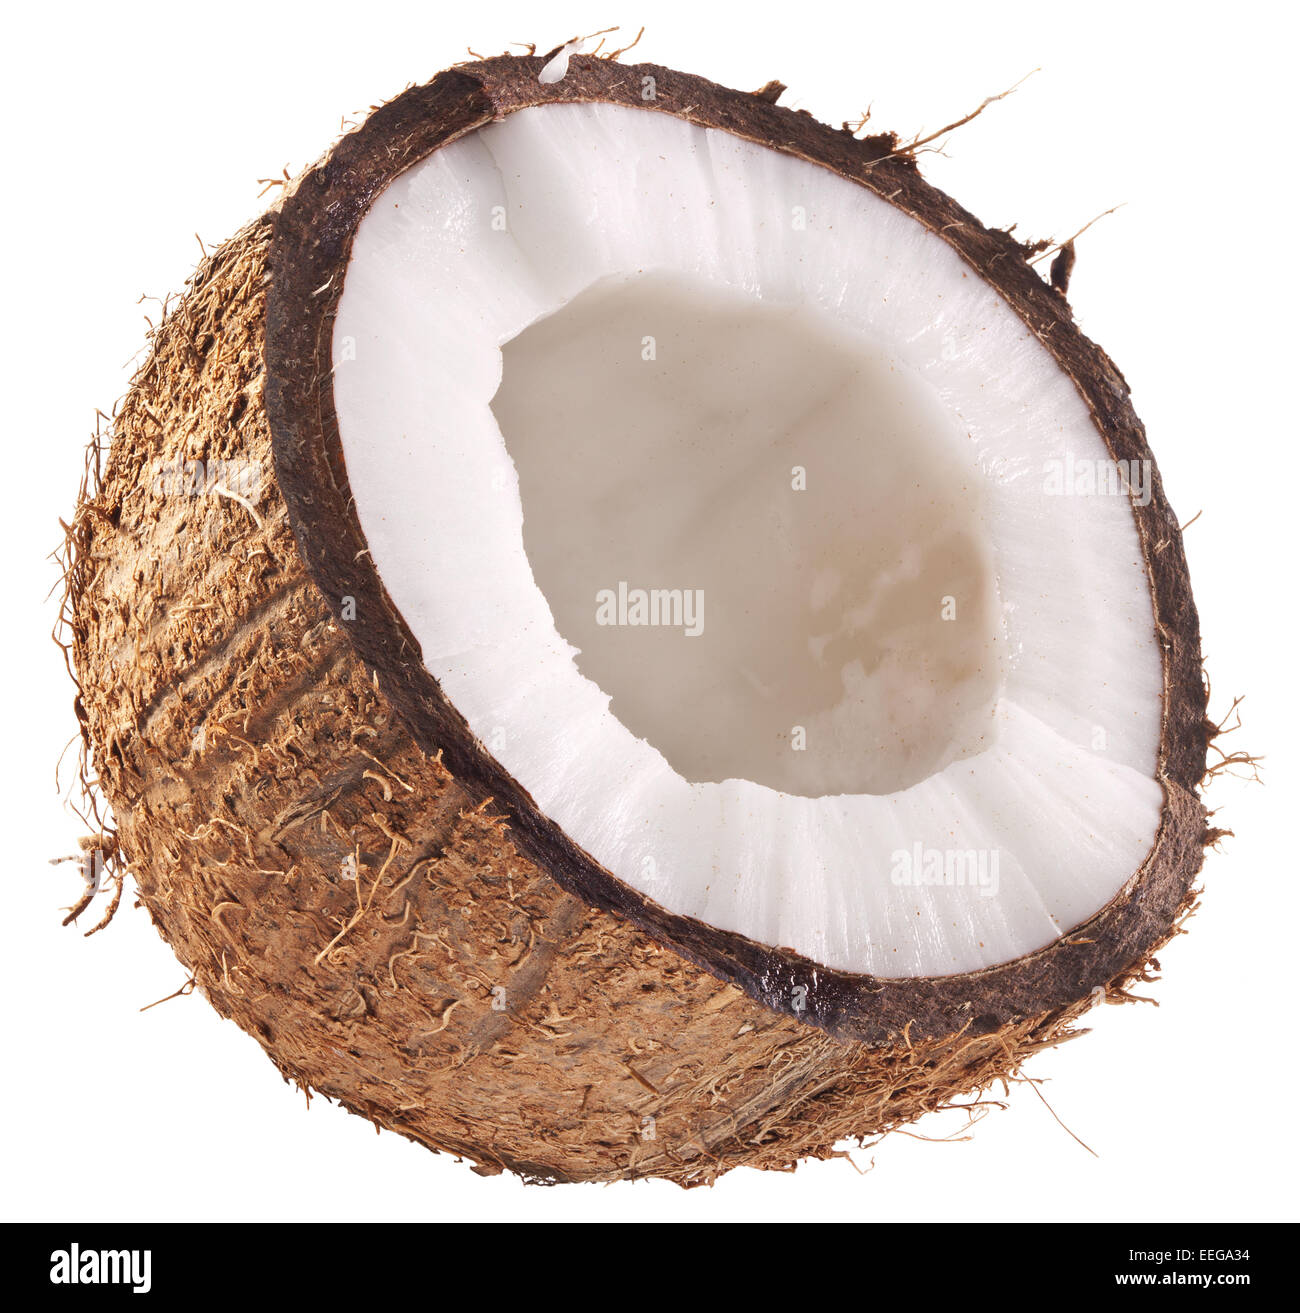 Half of coconut isolated on a white background. File contains clipping paths. Stock Photo